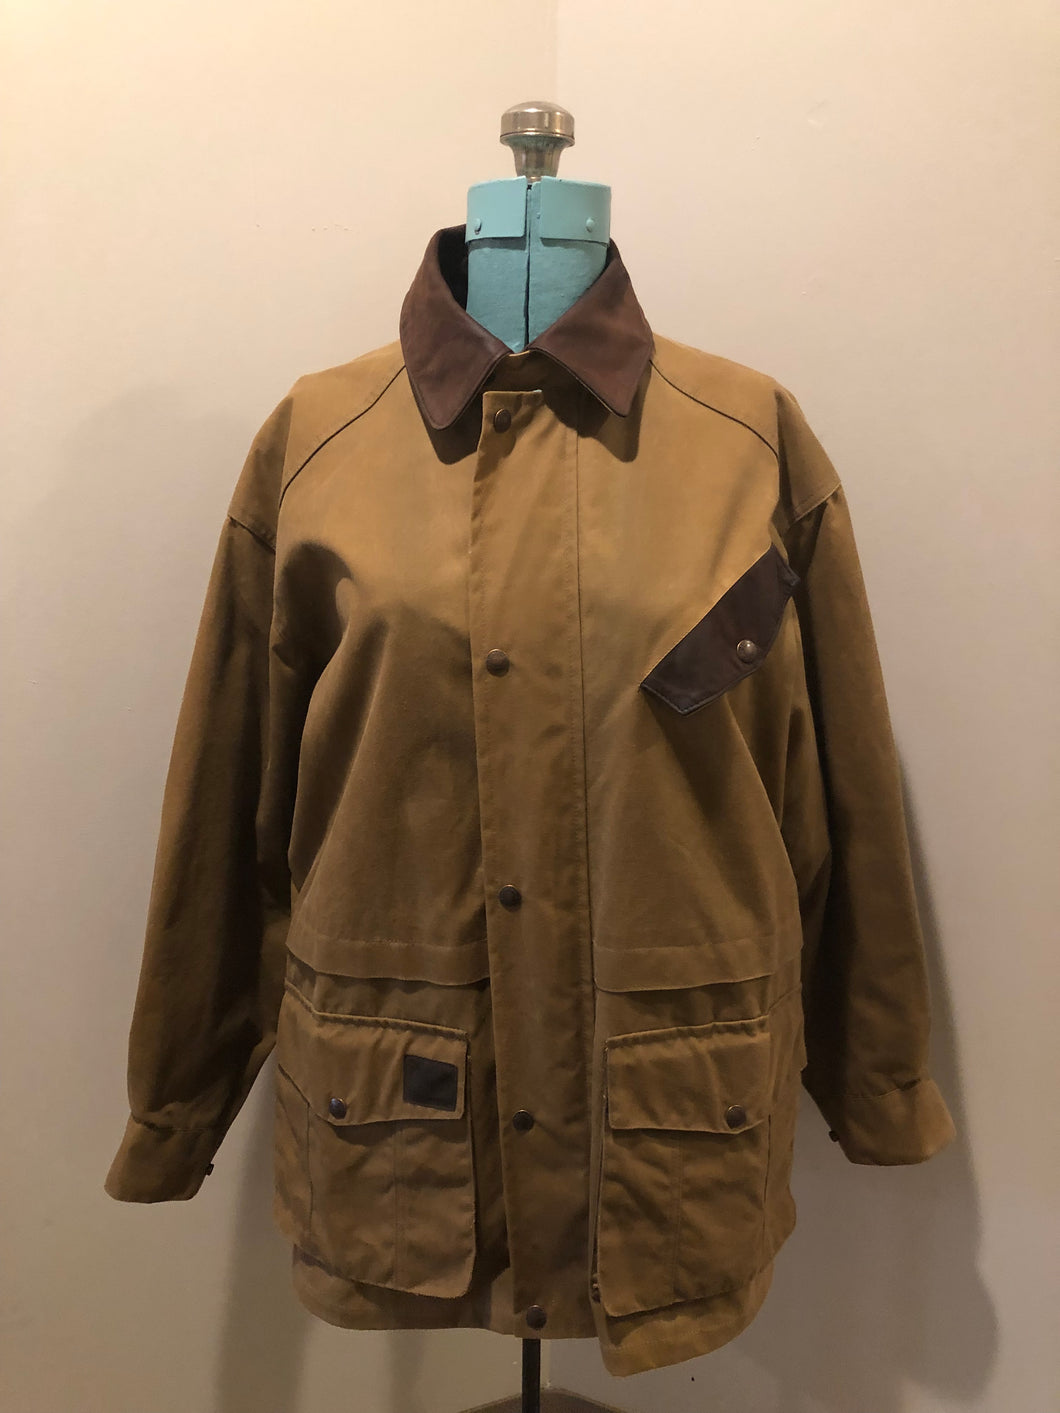 Vintage Australian Outback Collection Oilskin chore jacket with snap and zipper closure, flap pockets, wax cotton shell, plaid lining and leather trim. NWOT. Made in Canada - Kingspier Vintage